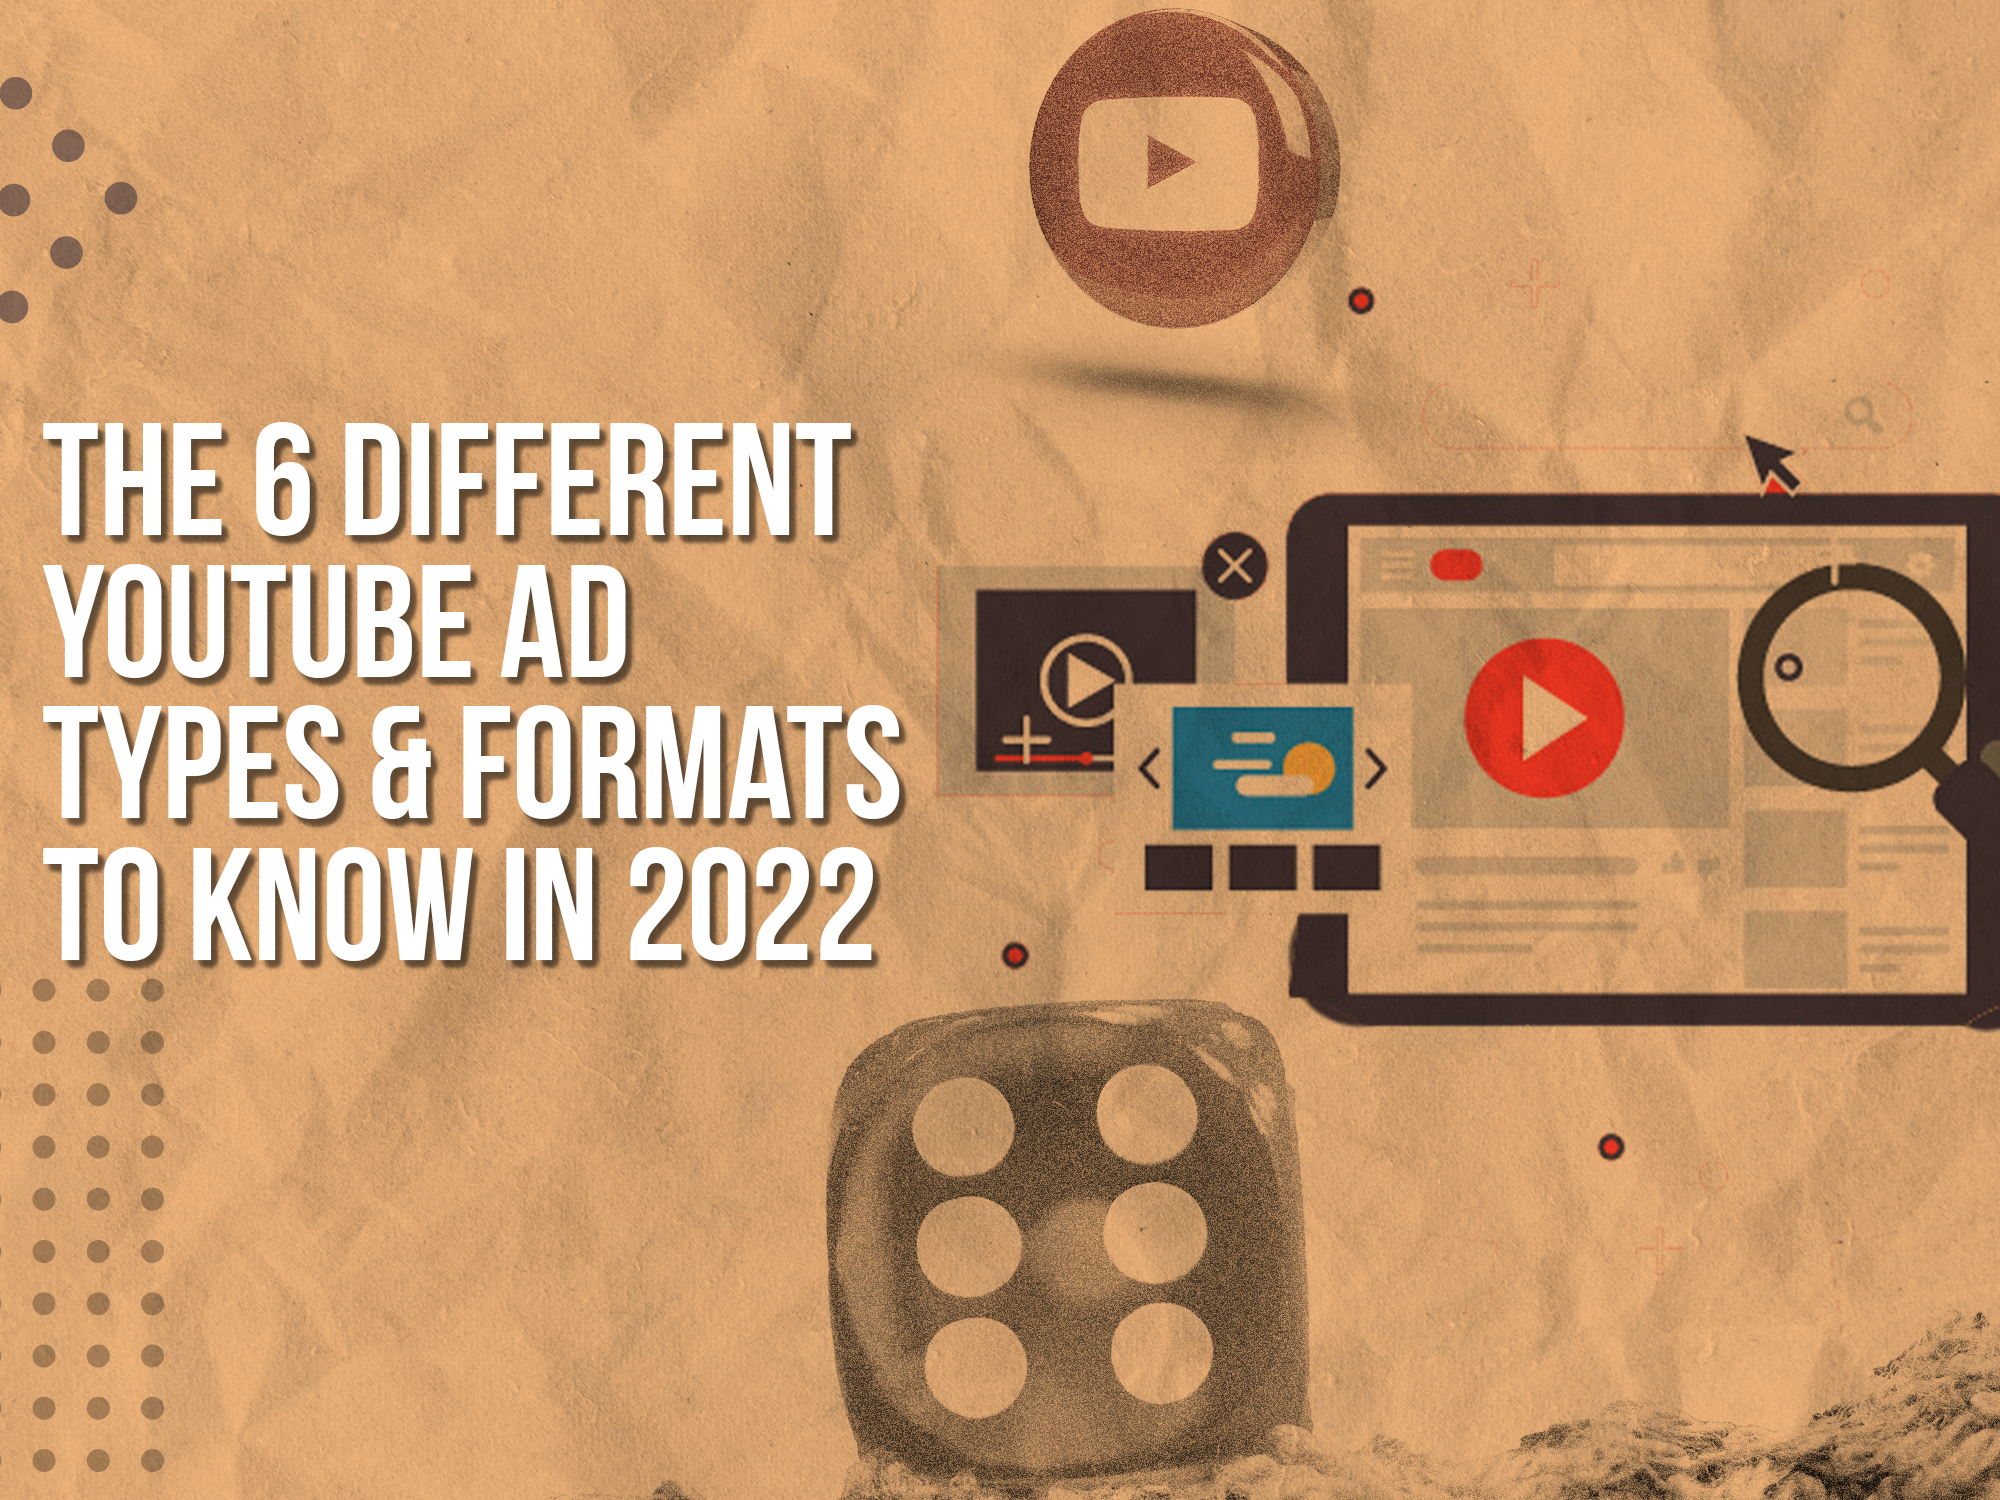 The 6 Different YouTube Ad Types & Formats to Know in 2022